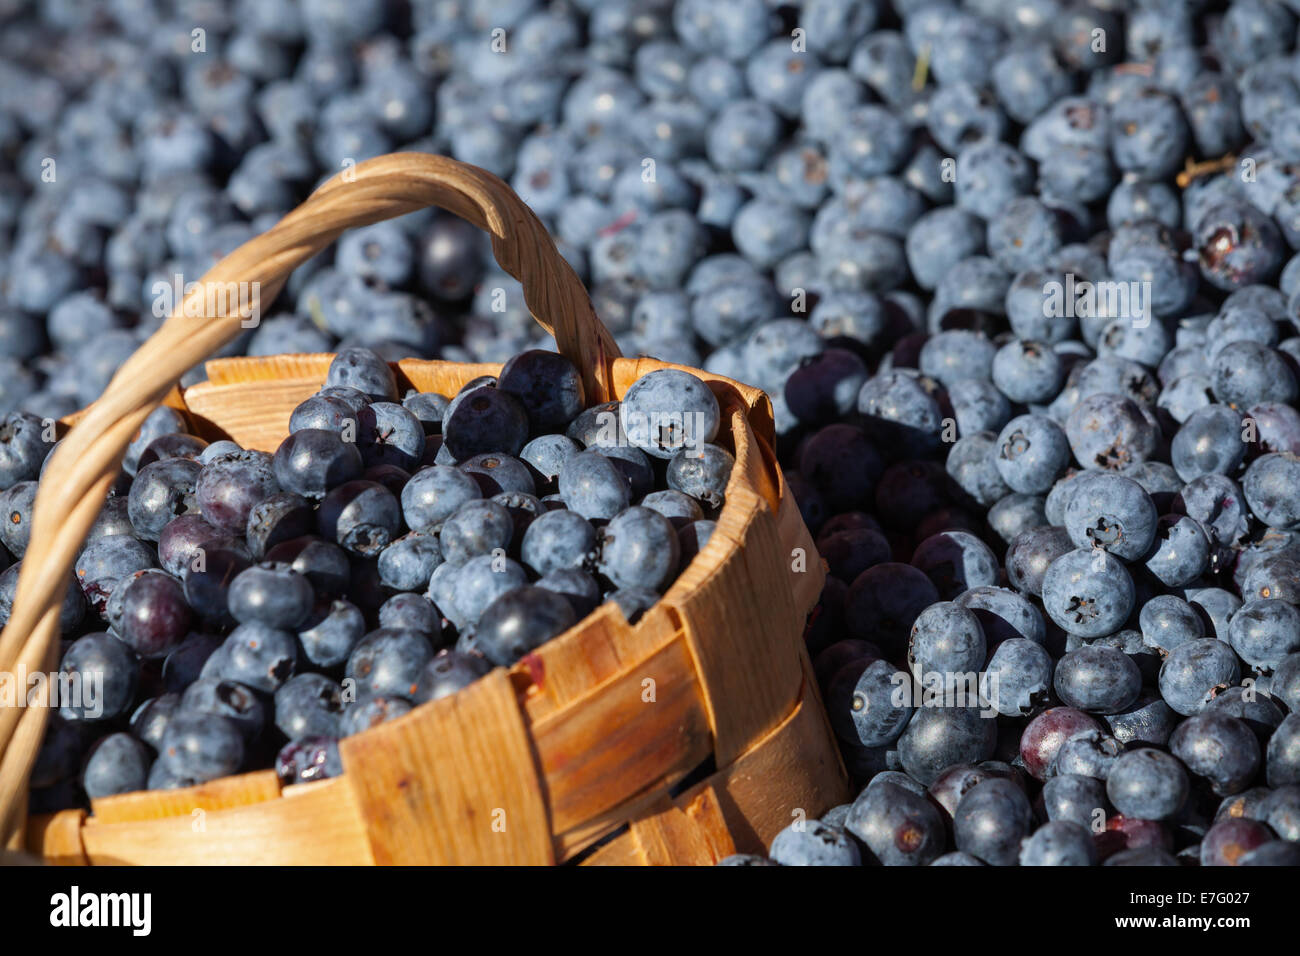 Lot of fresh blueberry with full bast basket, selective focus Stock Photo